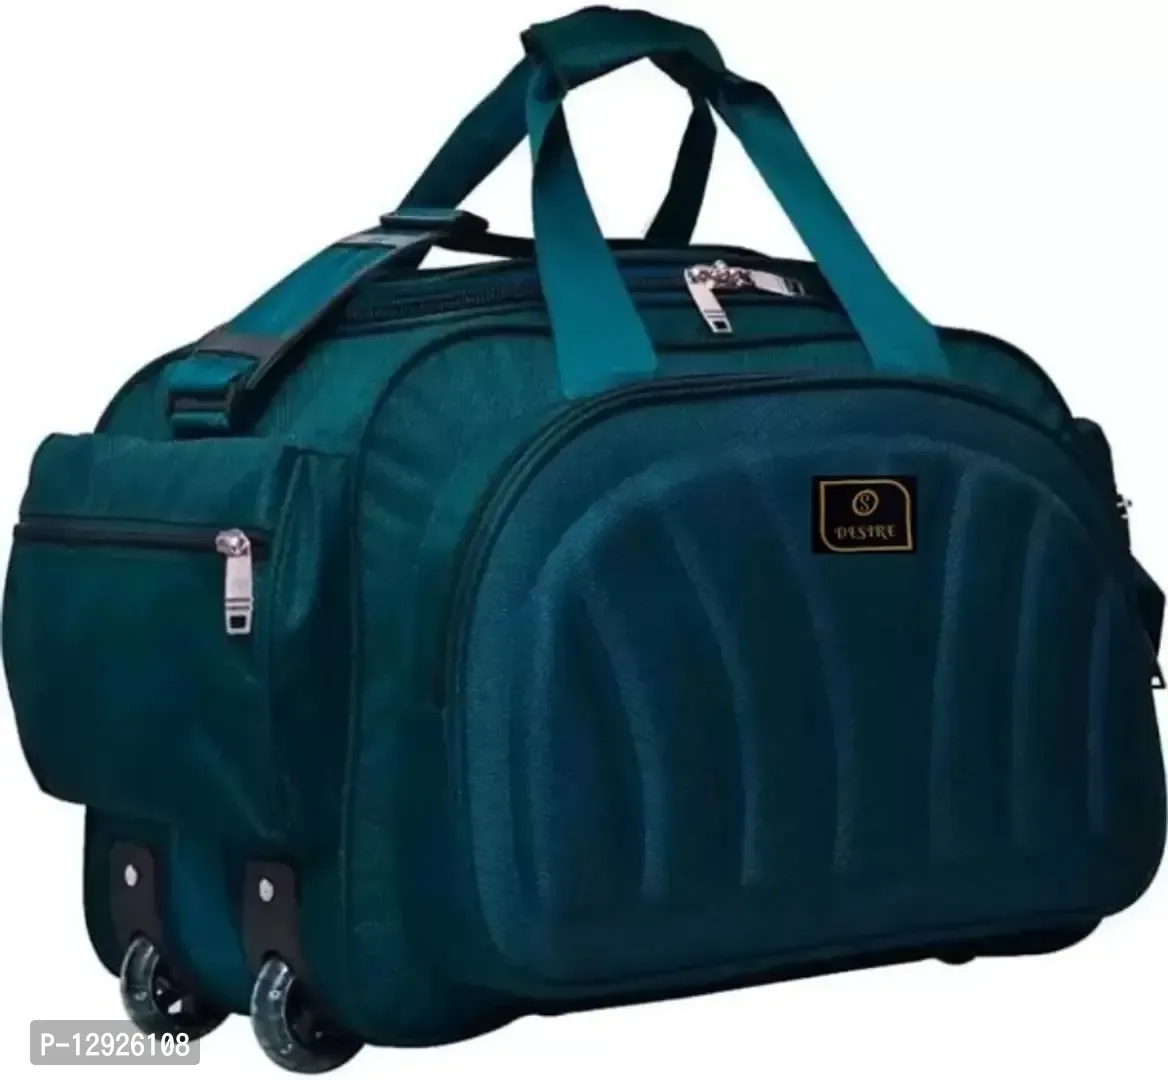 24X15 Inches Number Lock Four Wheel Abs Plastic Body Luggage Bag at Best  Price in Jalandhar  Nand Enterprises